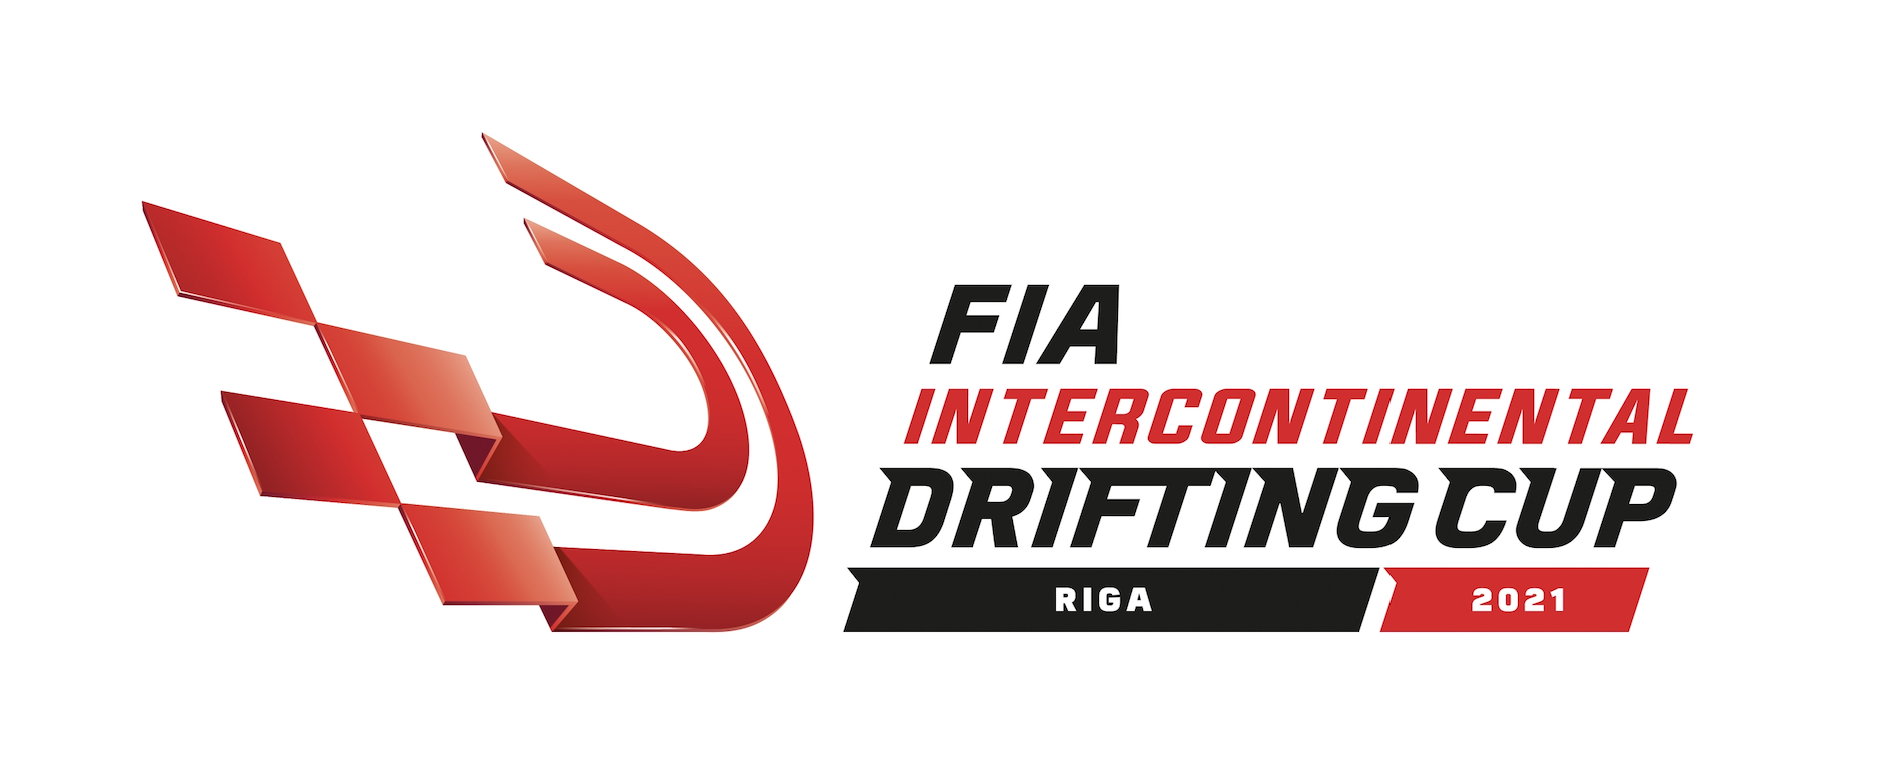 FIA approves first ever Drifting vehicle regulations